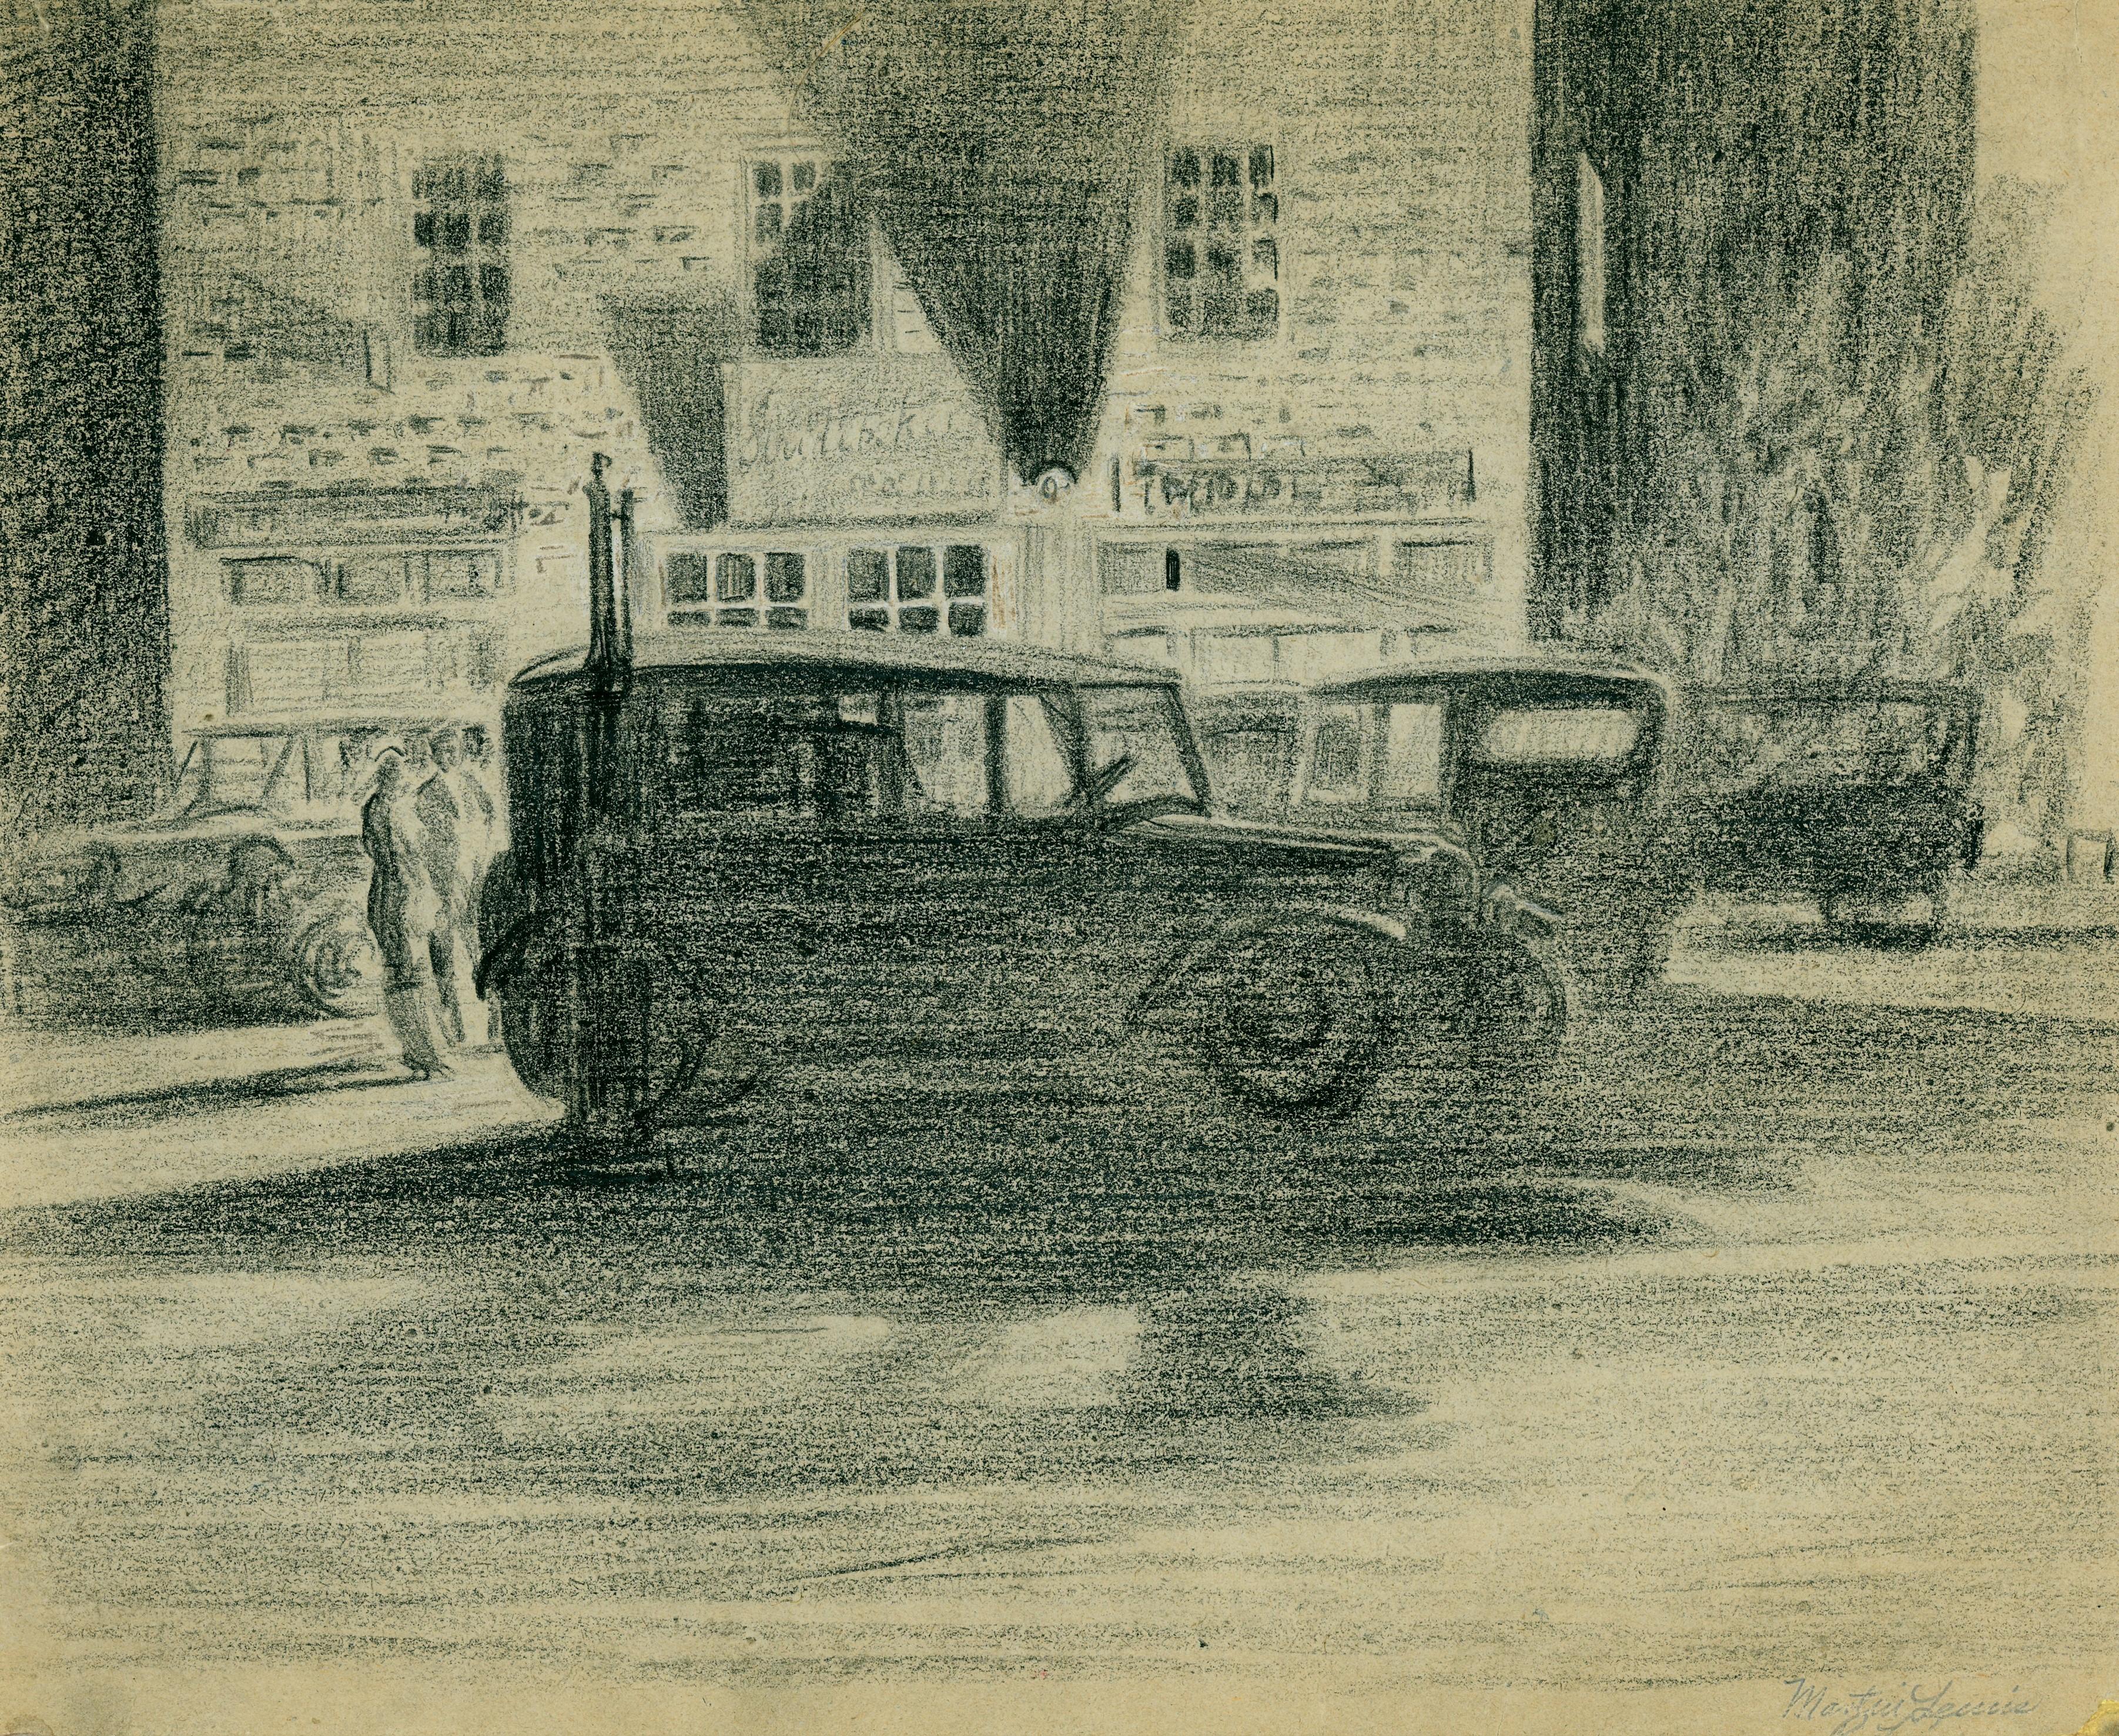 Shadows -- Garage at Night. c. 1928. Conte crayon drawing. Study for the drypoint, McCarron 69. 10 1/8 x 12 3/4 (the drypoint measures 9 7/8 x 11 7/8). The drypoint is illustrated in Fine Prints of the Year, 1928. Paper losses in the upper and lower